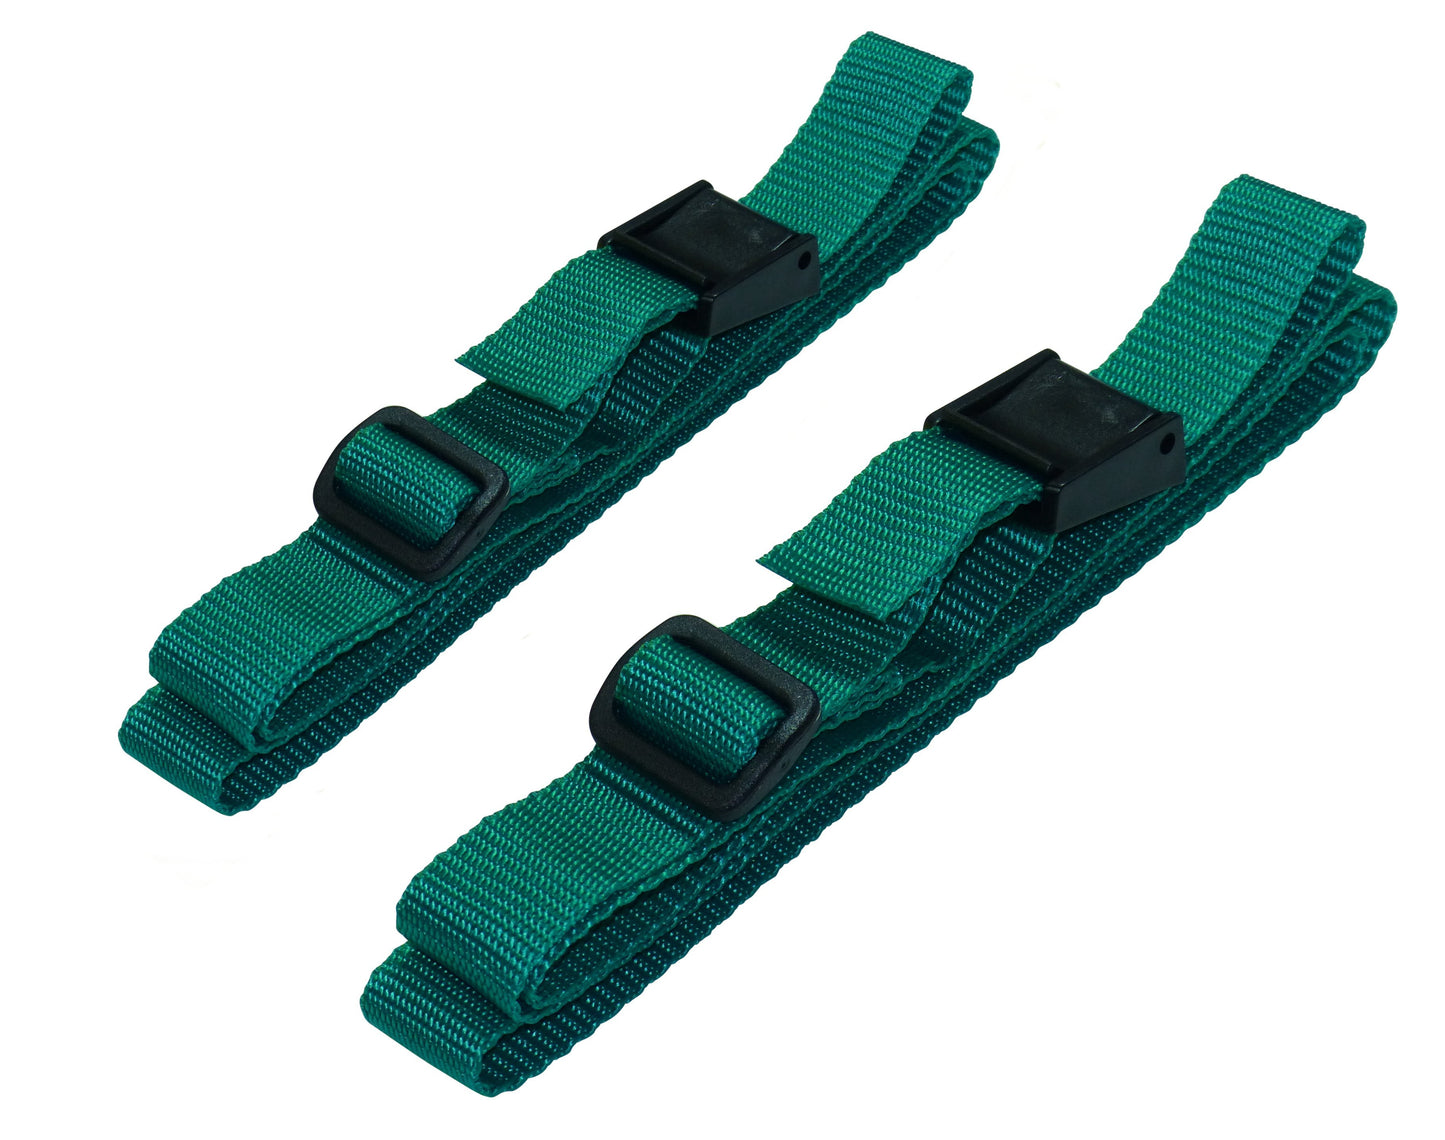 25mm Rivetted Strap with Plastic Cam Buckle & Triglide Buckles (Pair) in emerald